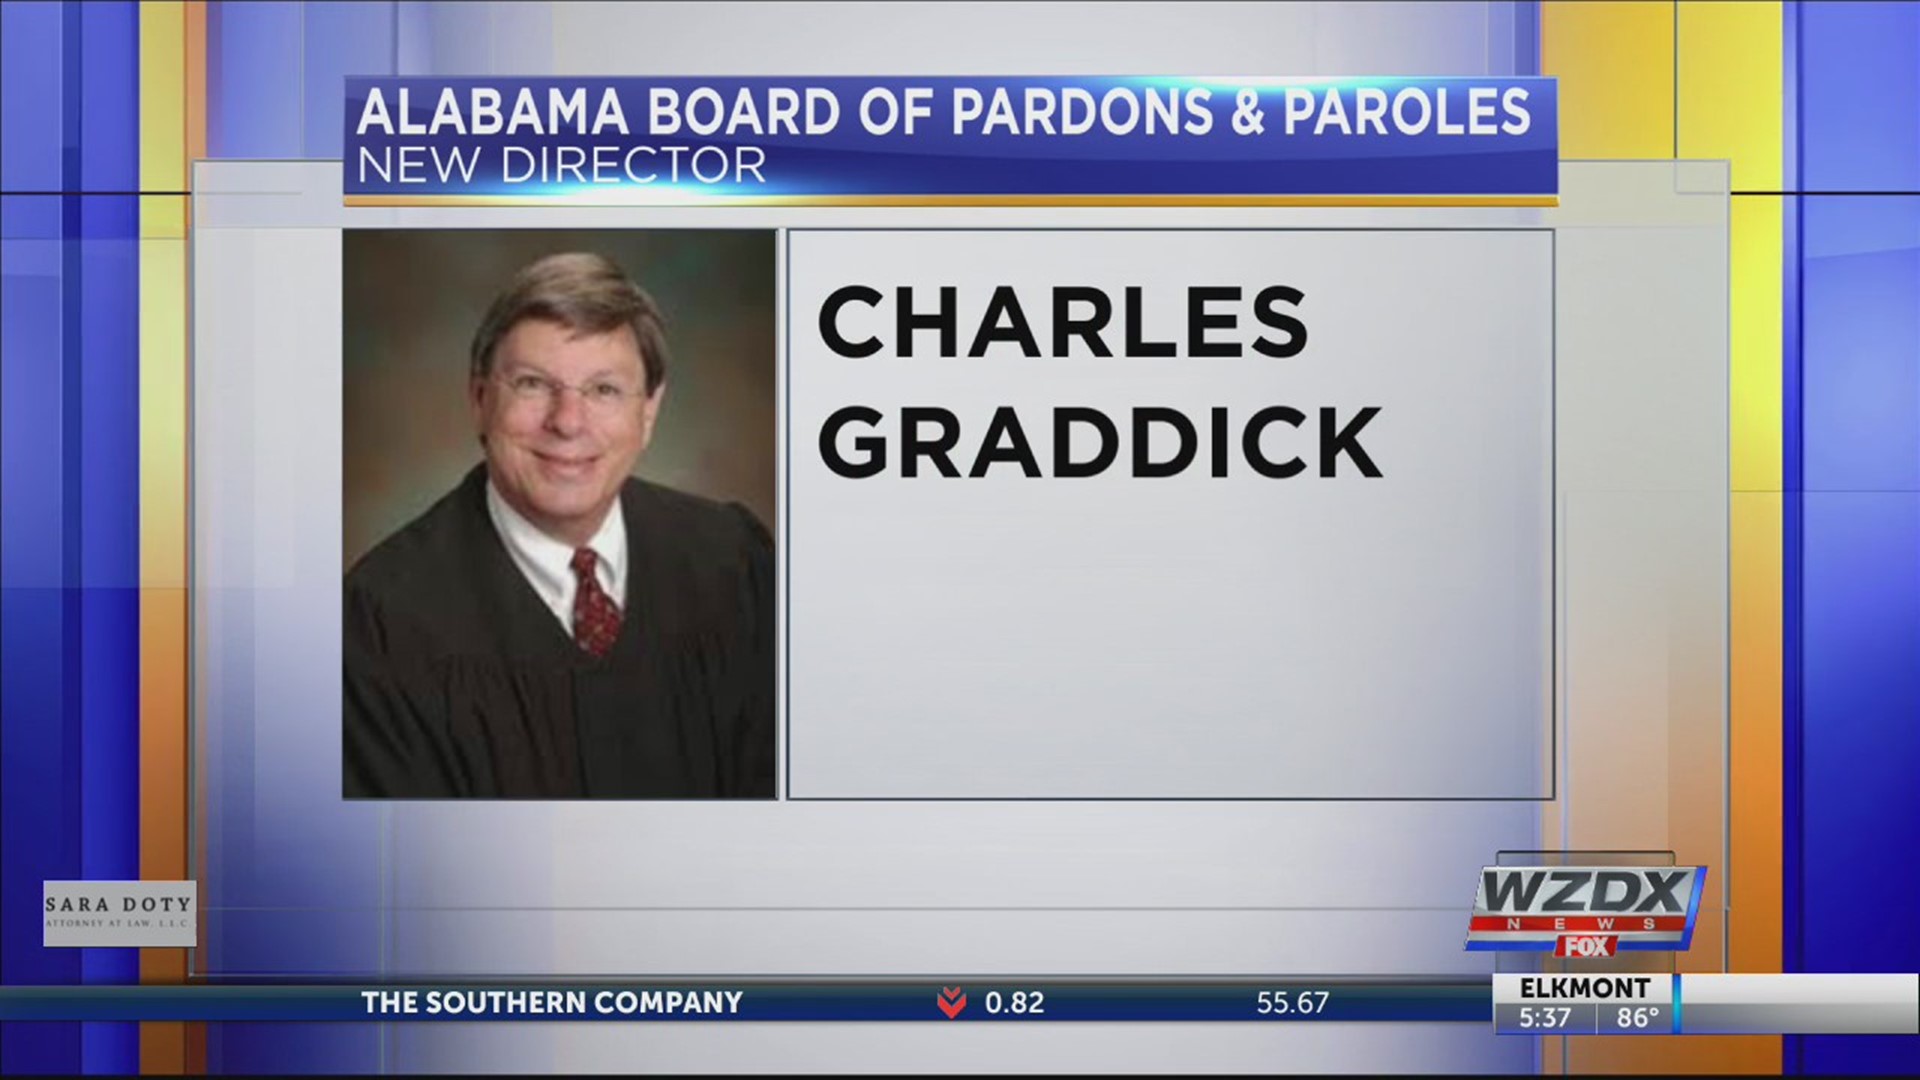 Governor Kay Ivey named Charles Graddick as the new director of the AL Board of Pardons and Paroles.